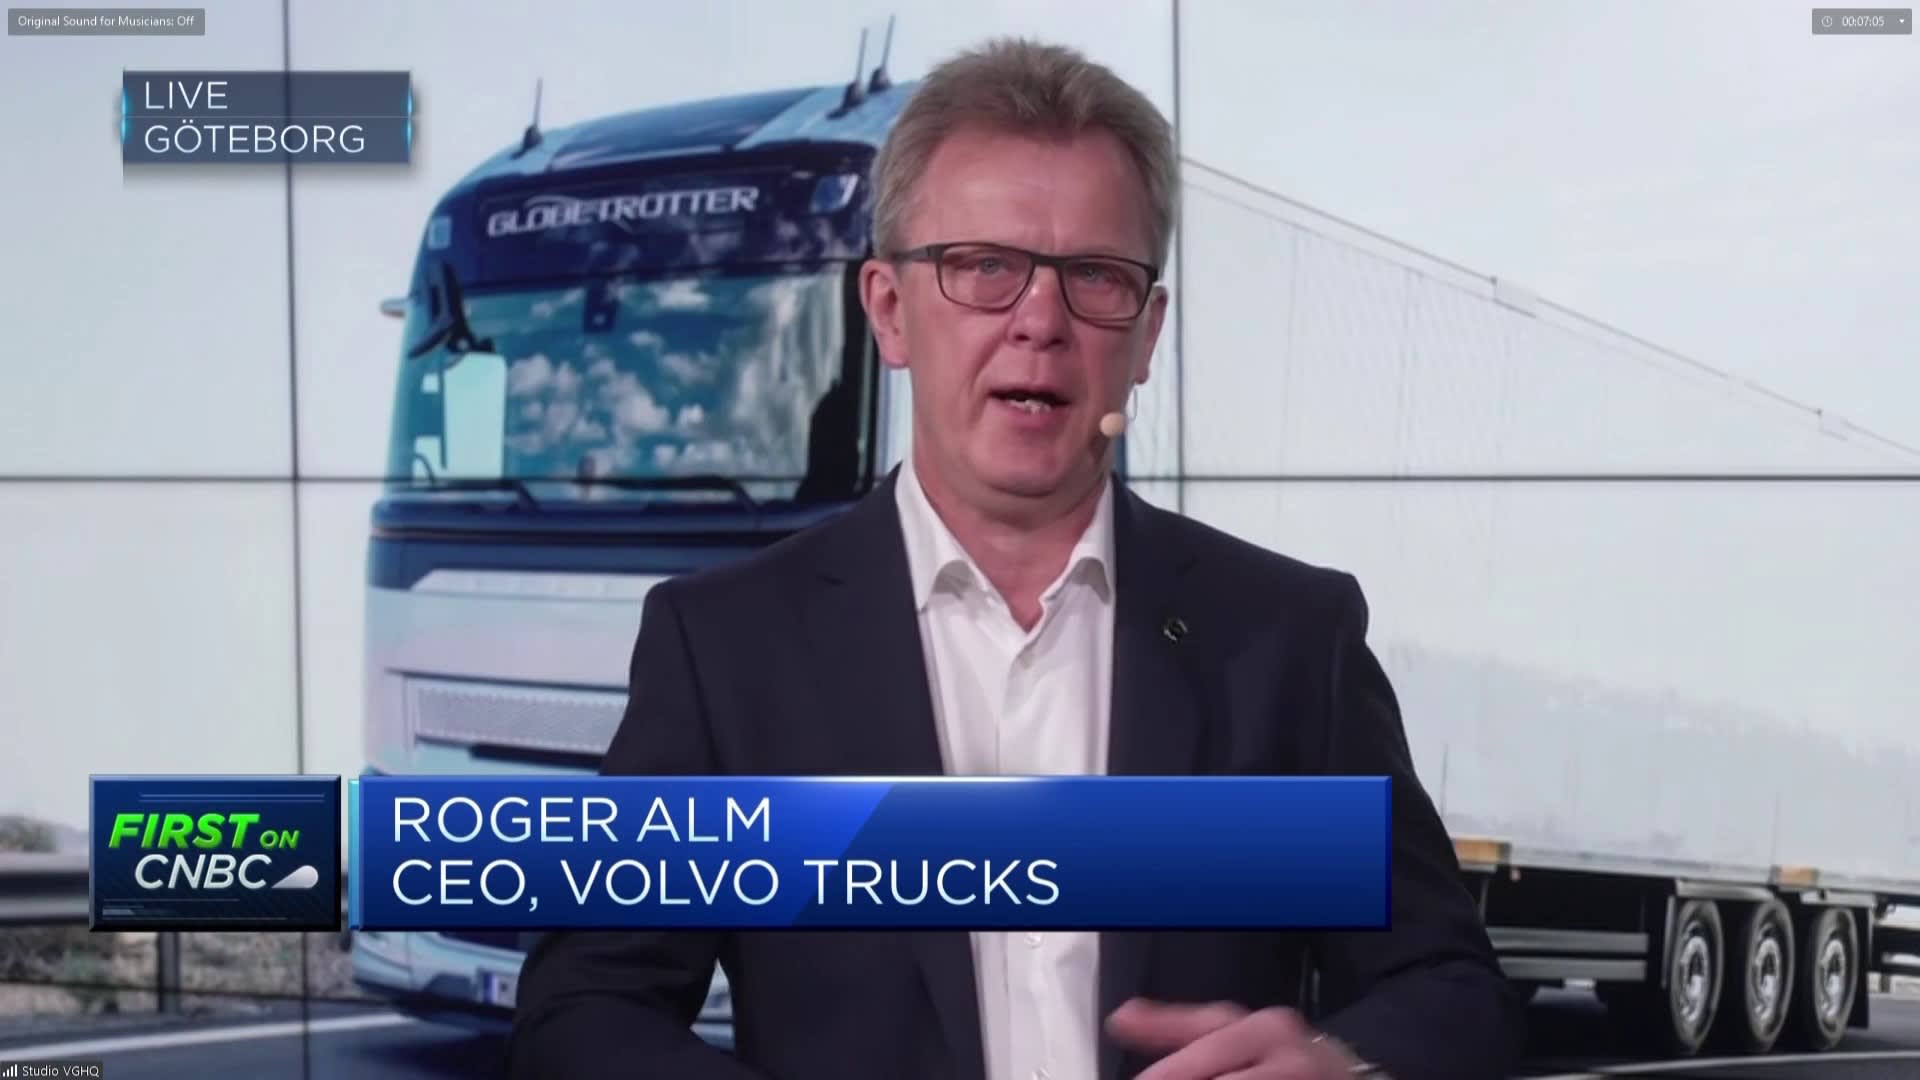 Volvo Trucks CEO says firm is 'making huge investments' into electrical batteries